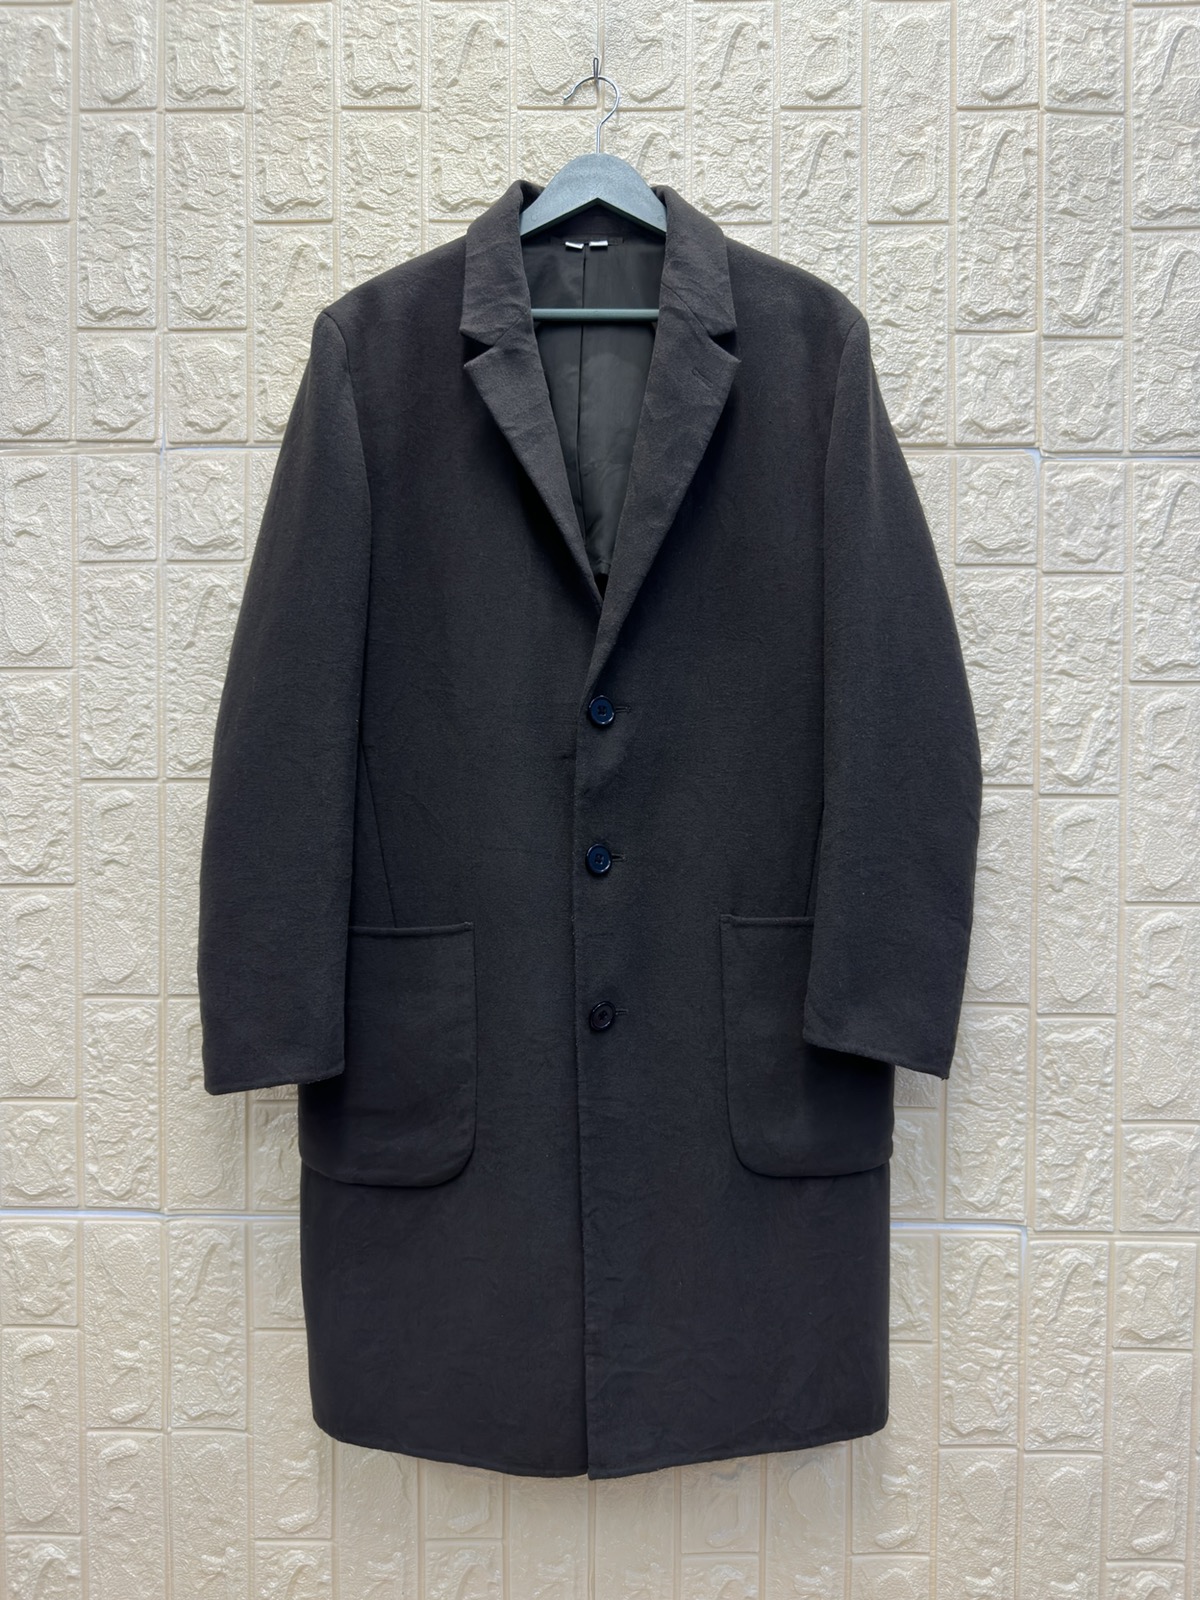 Undercover X Uniqlo Wool Trench Coat-GR97 - 1